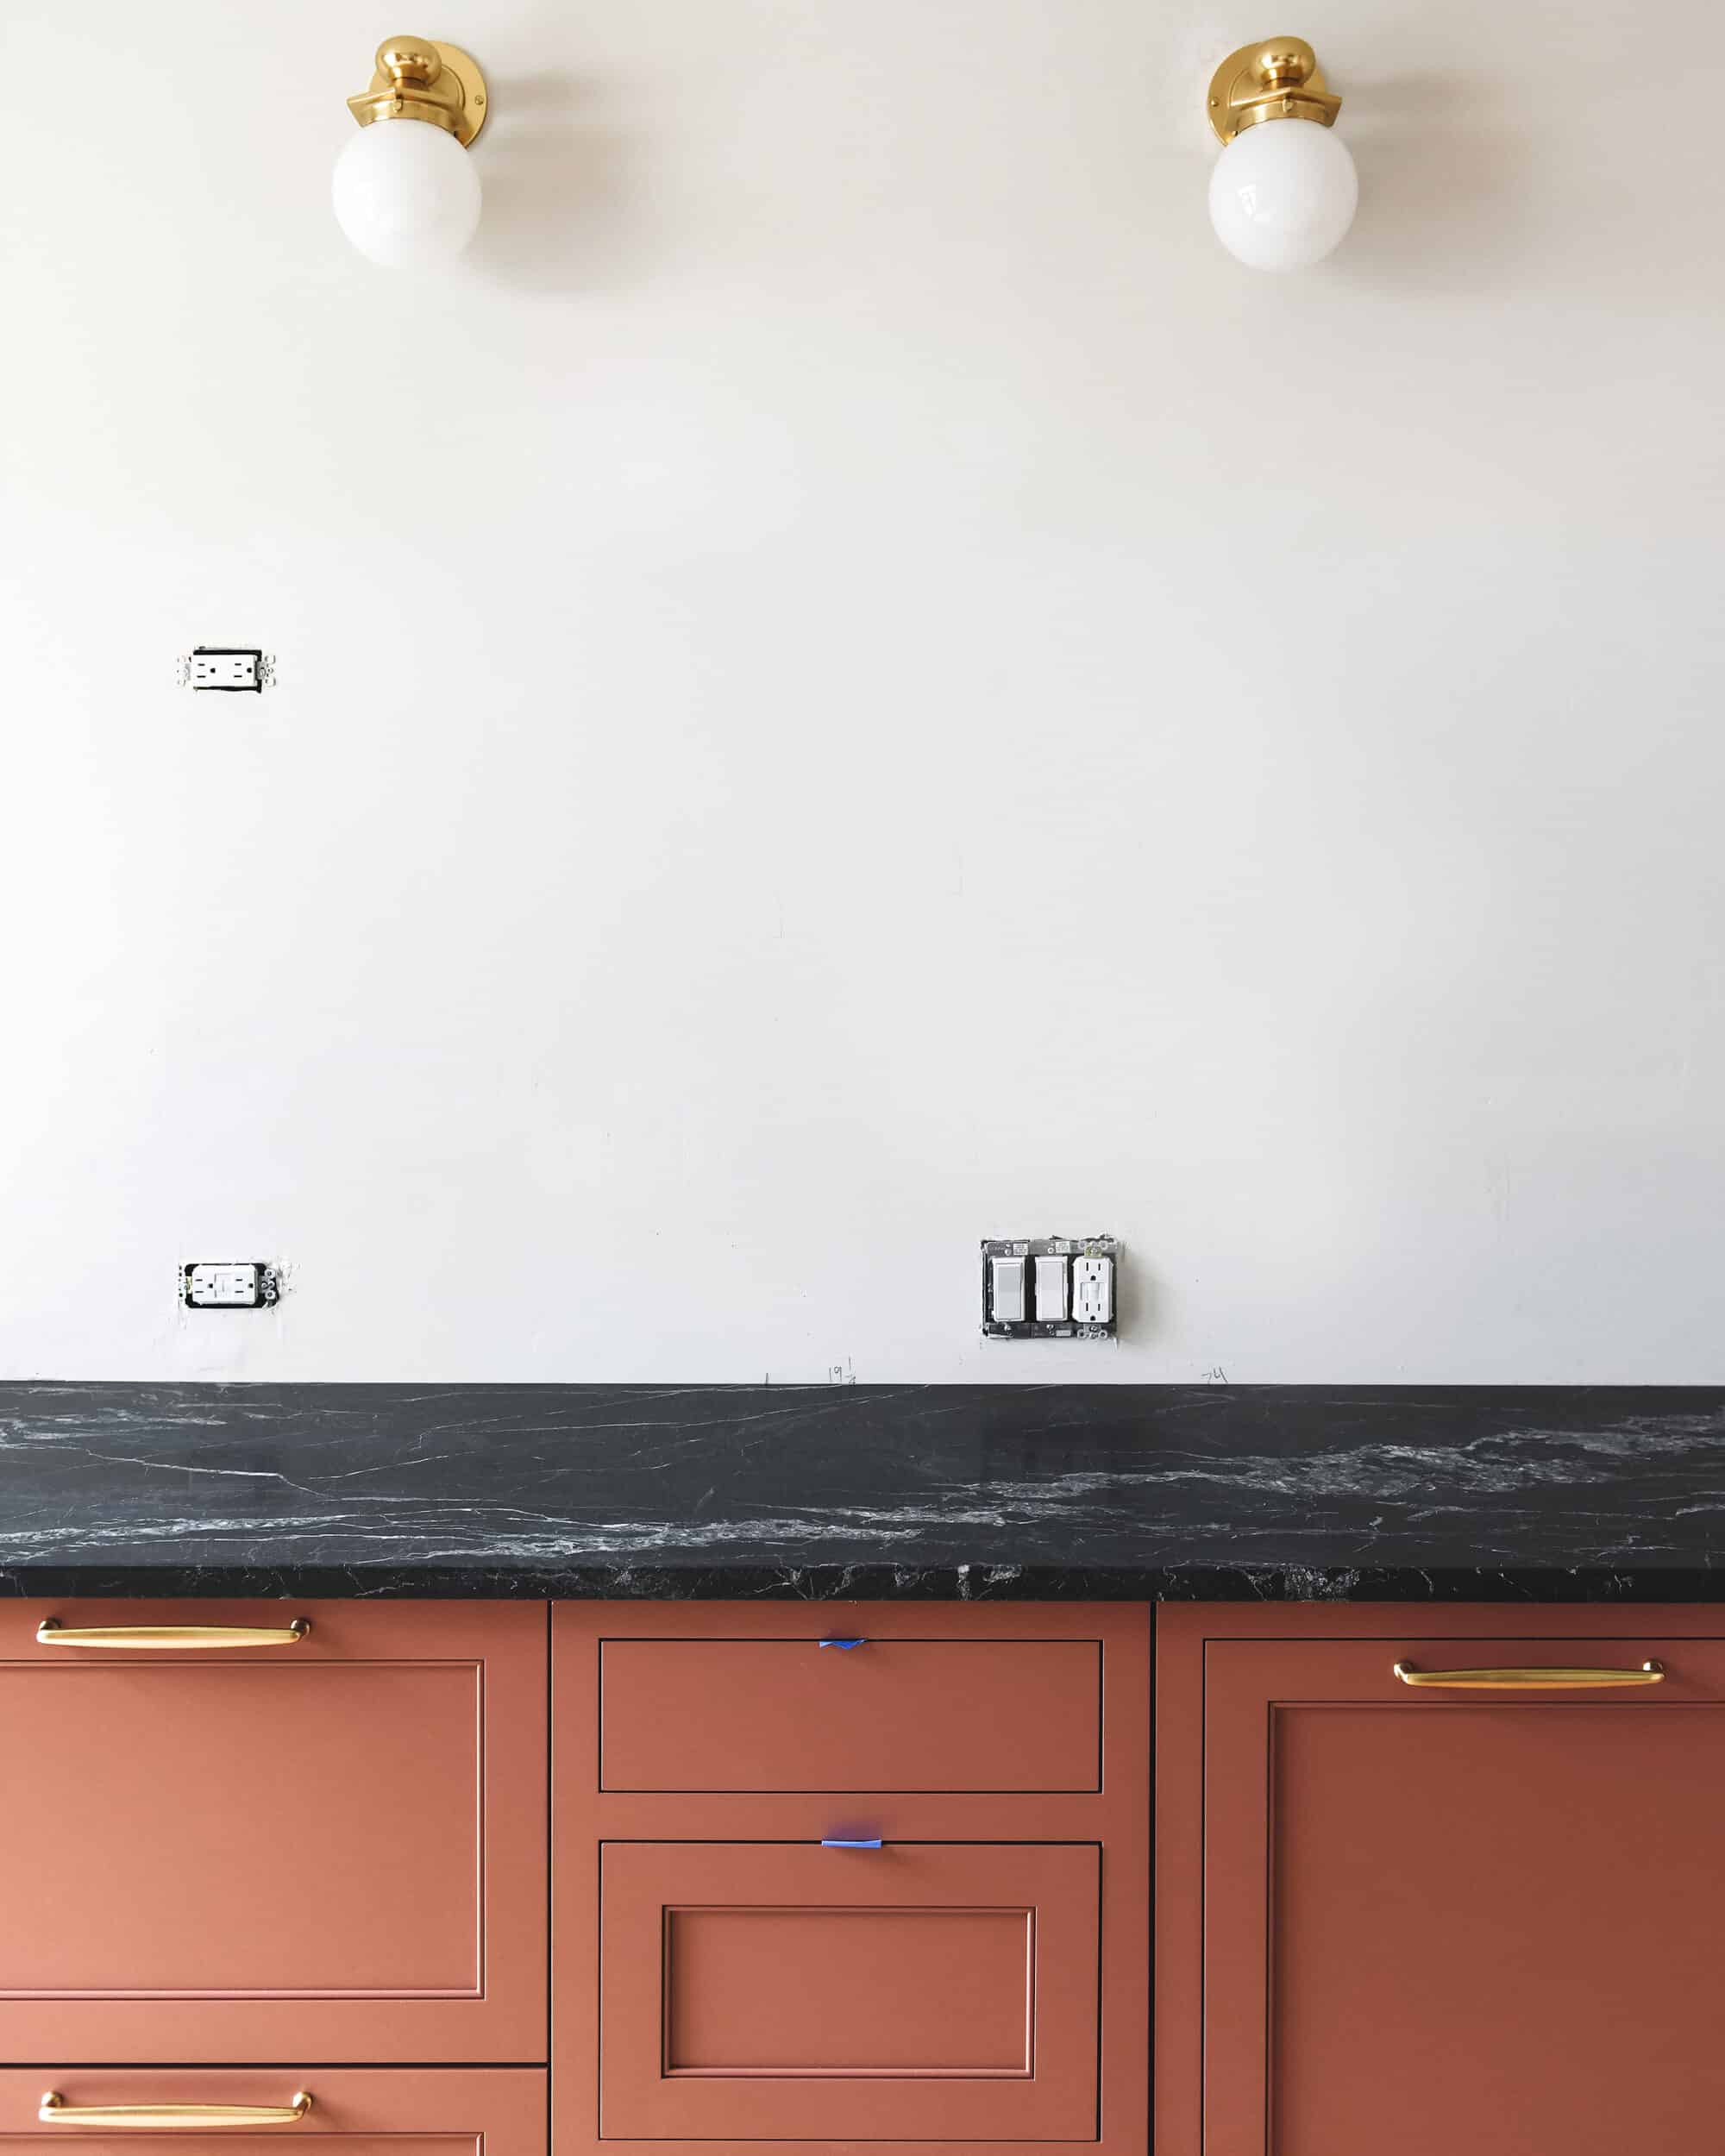 Our newly installed black marble countertops!  // via Yellow Brick Home